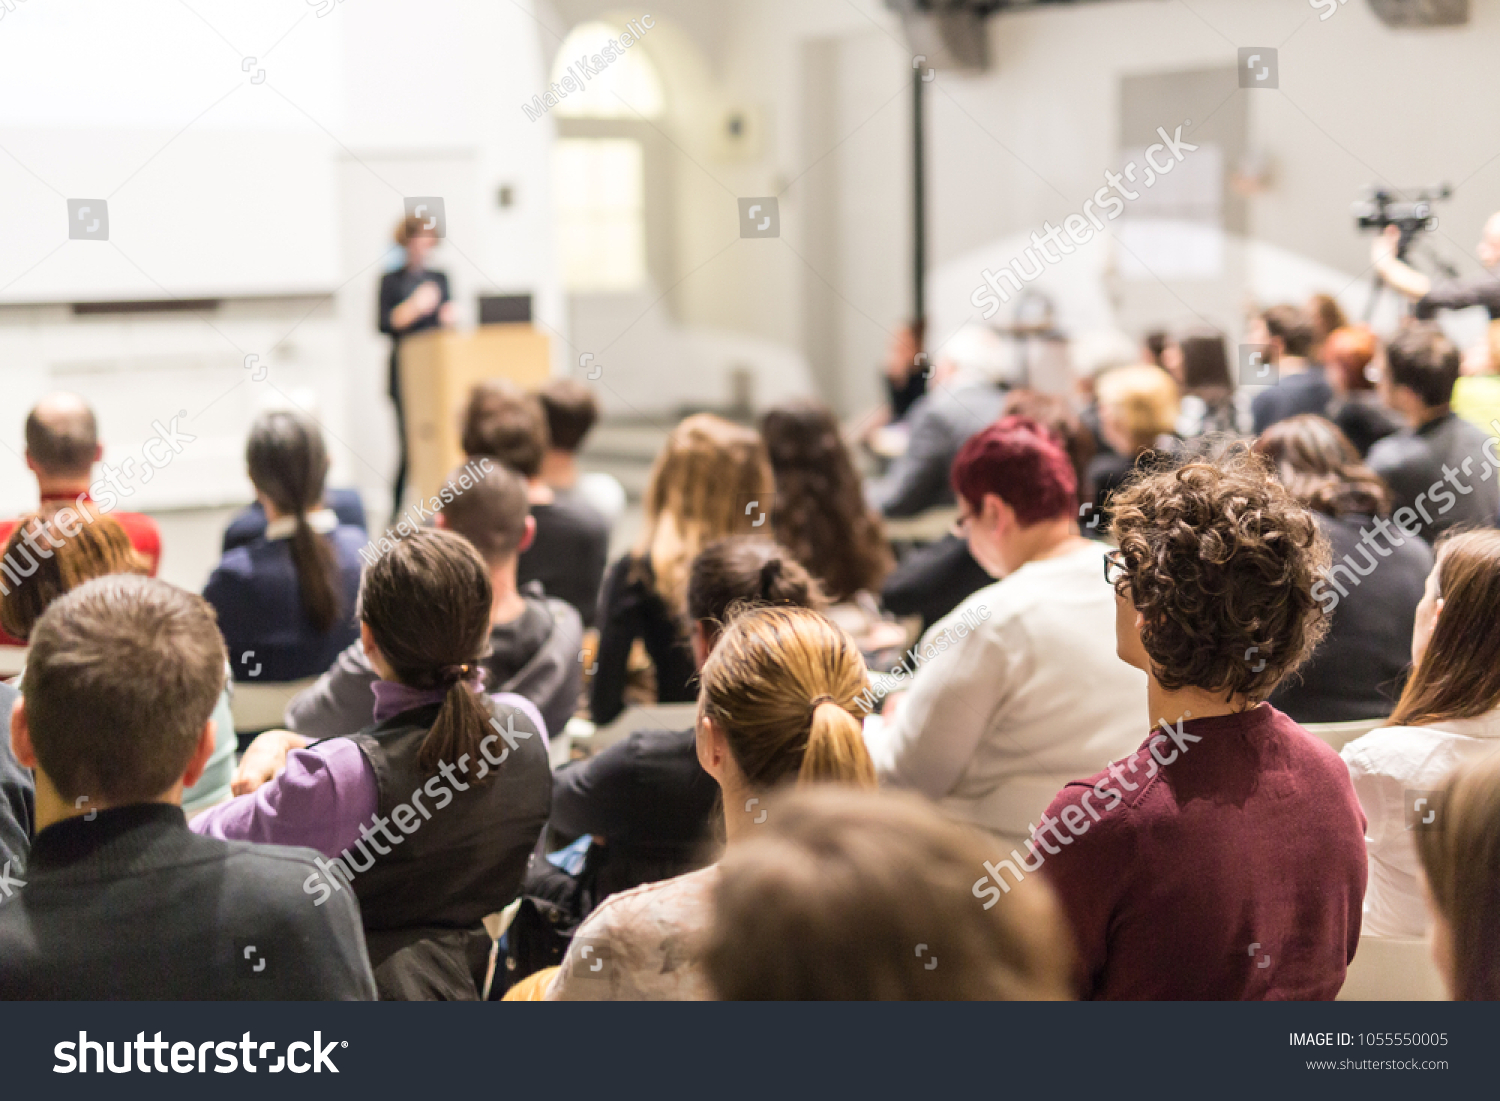 Business and entrepreneurship symposium. Female speaker giving a talk at business meeting. Audience in conference hall. Rear view of unrecognized participant in audience. Copy space on whitescreen. #1055550005